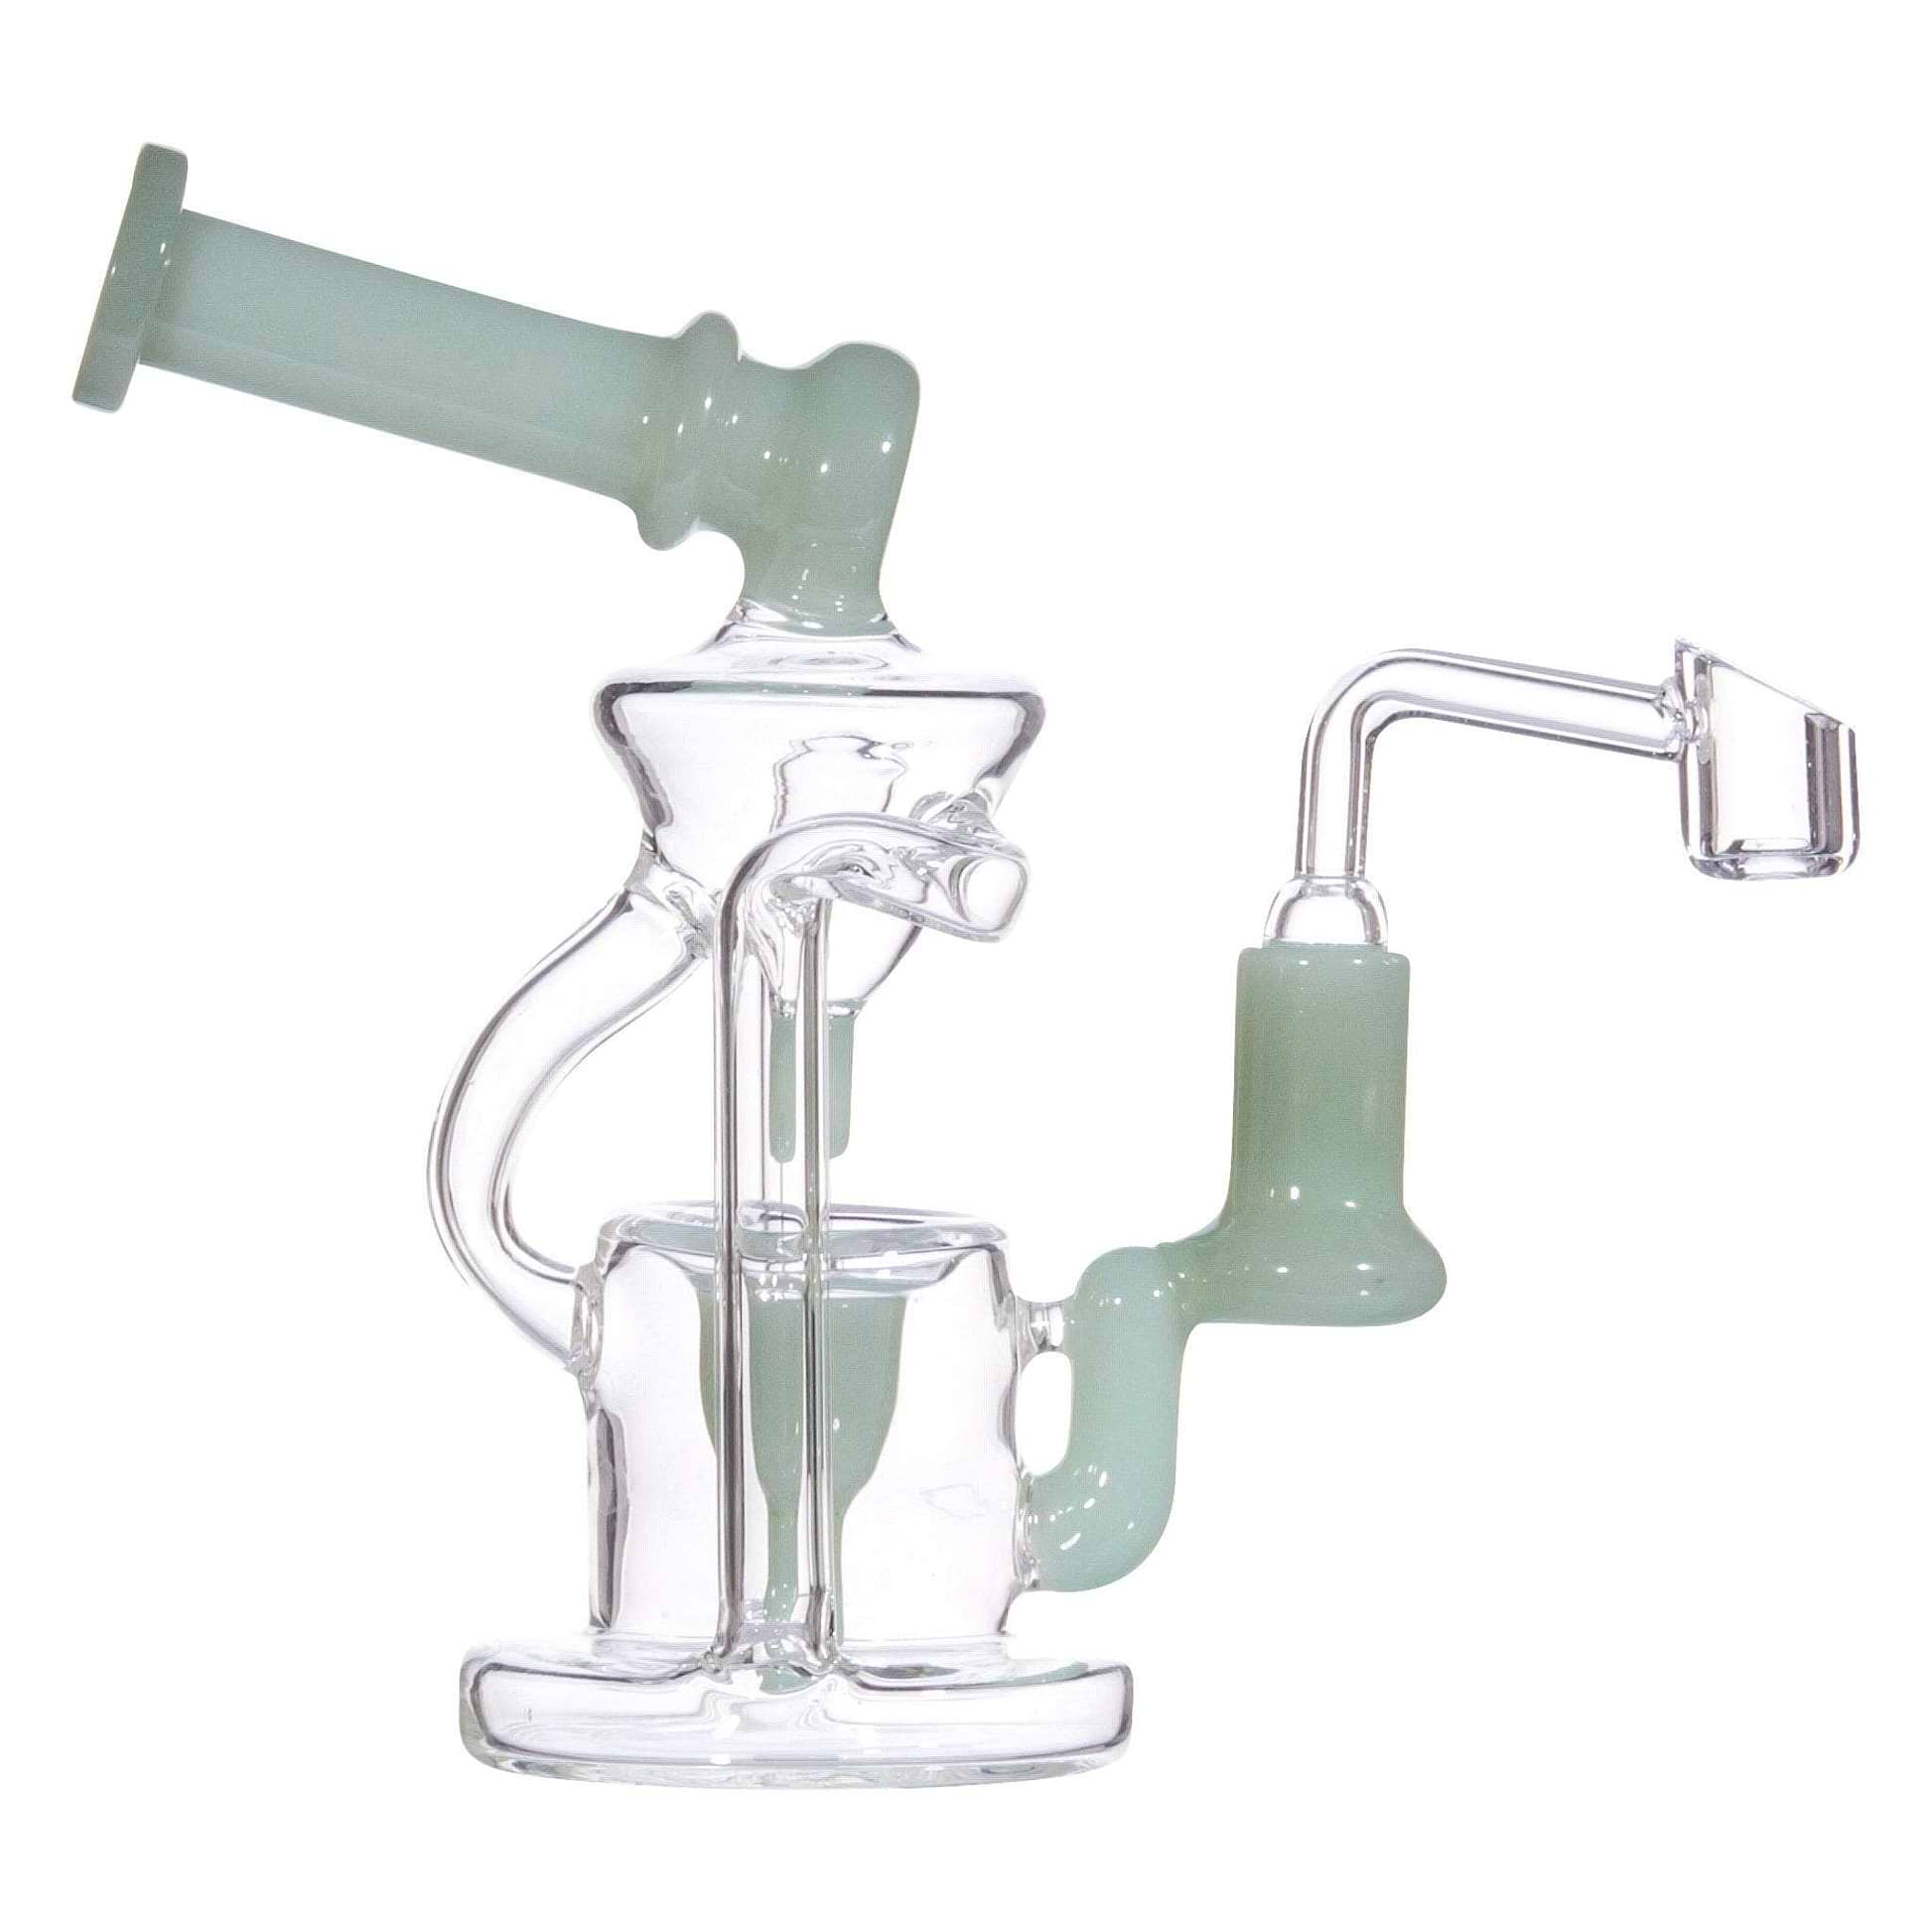 Jade 3-ounce dab rig smoking device recyler system filters laboratory telescope shape design